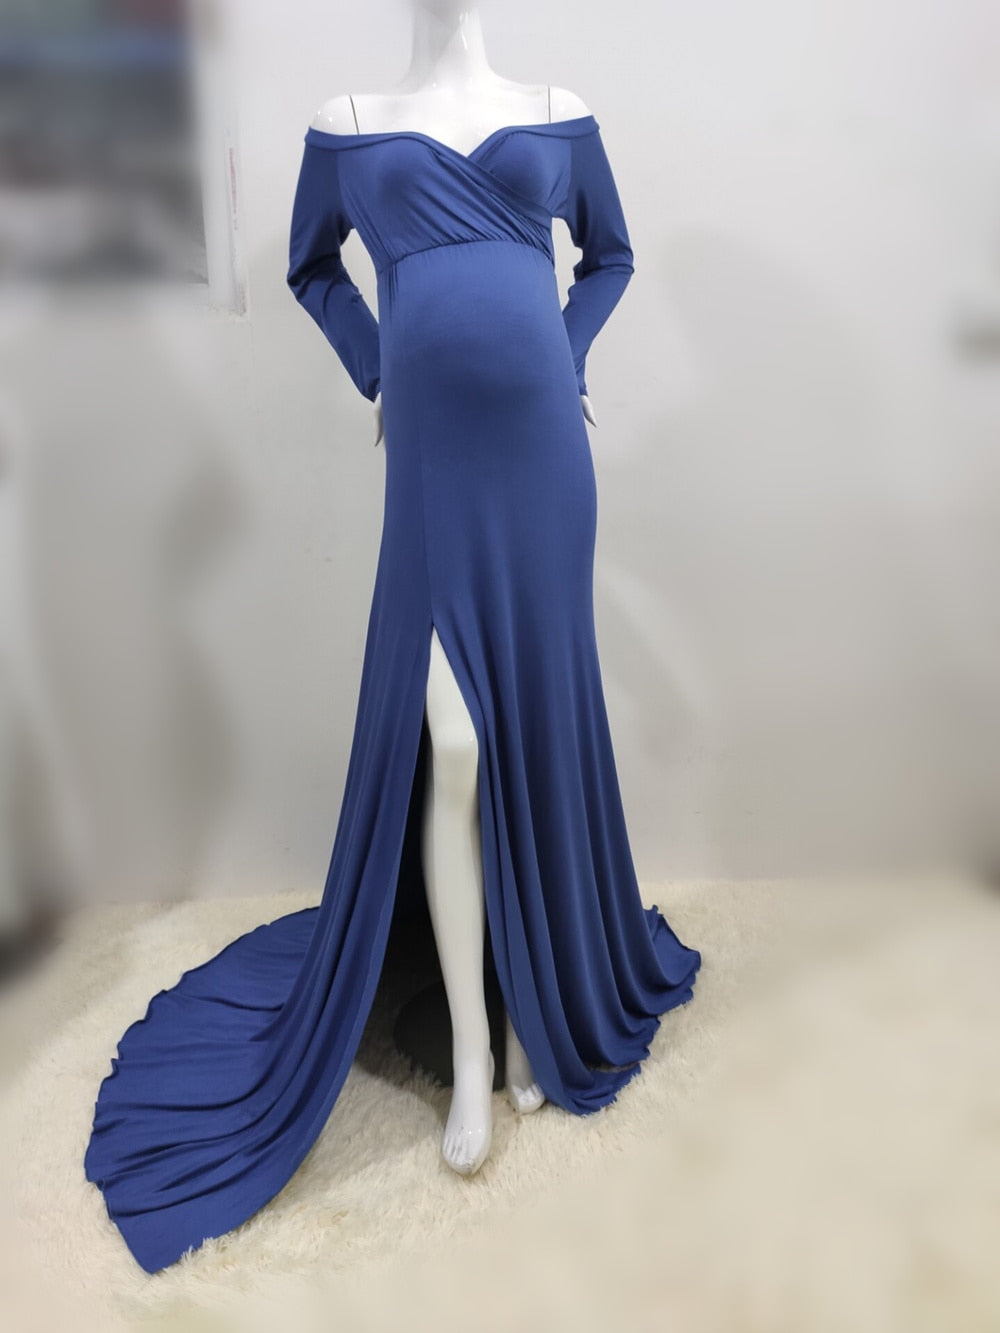 Sexy Shoulderless Maternity Dresses For Photoshoot Maxi Gown Baby Shower Women Pregnant Photography Clothes Long Pregnancy Dress